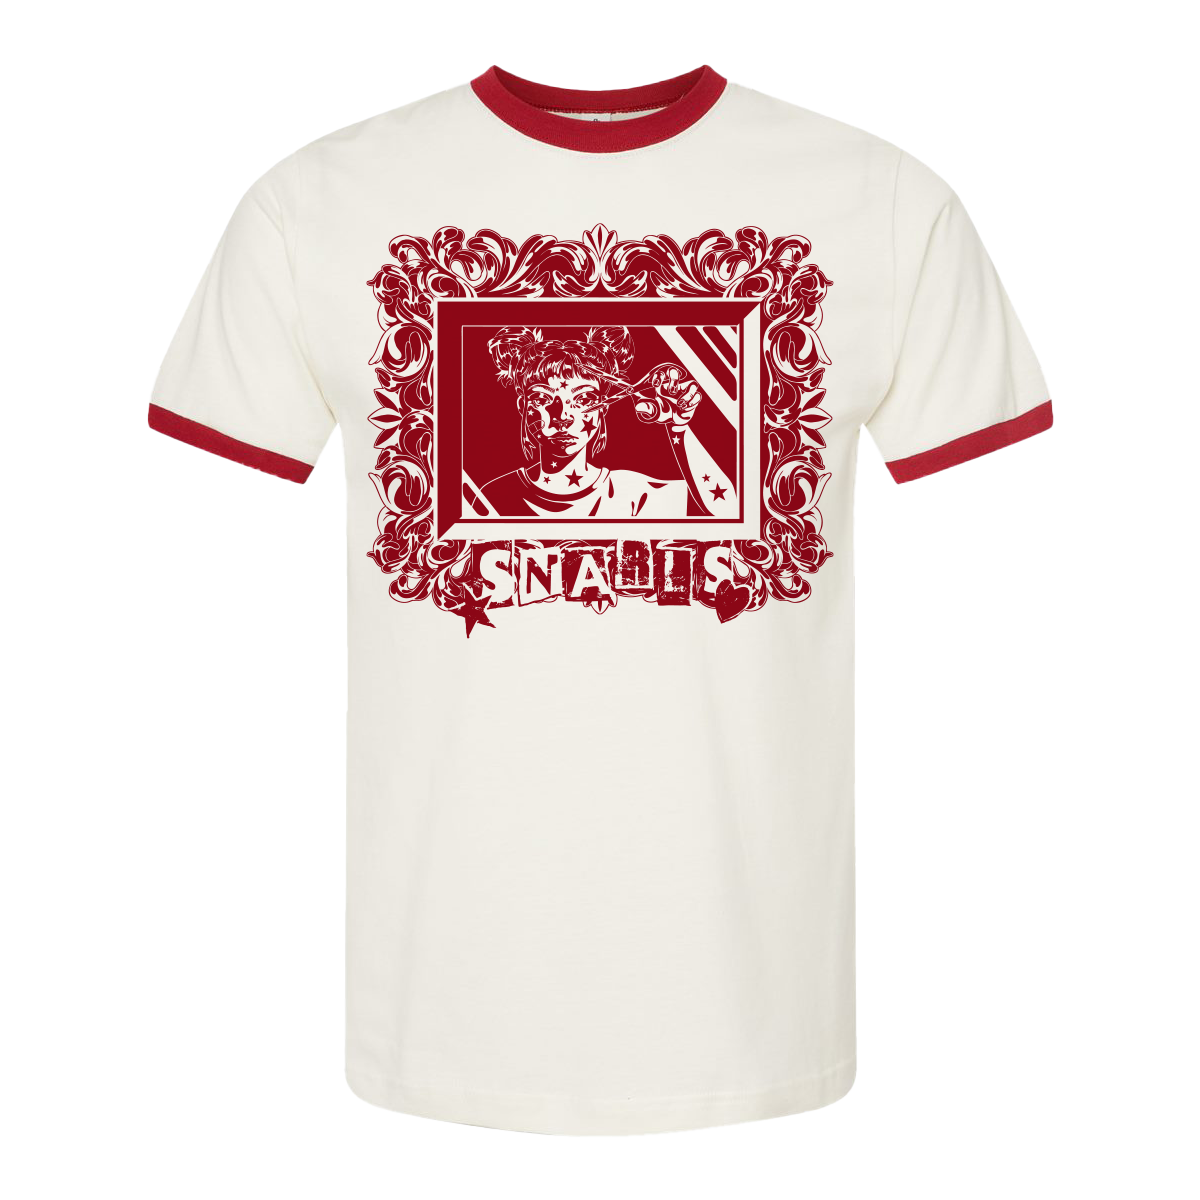 Snarls - "With Love," Ringer T-Shirt